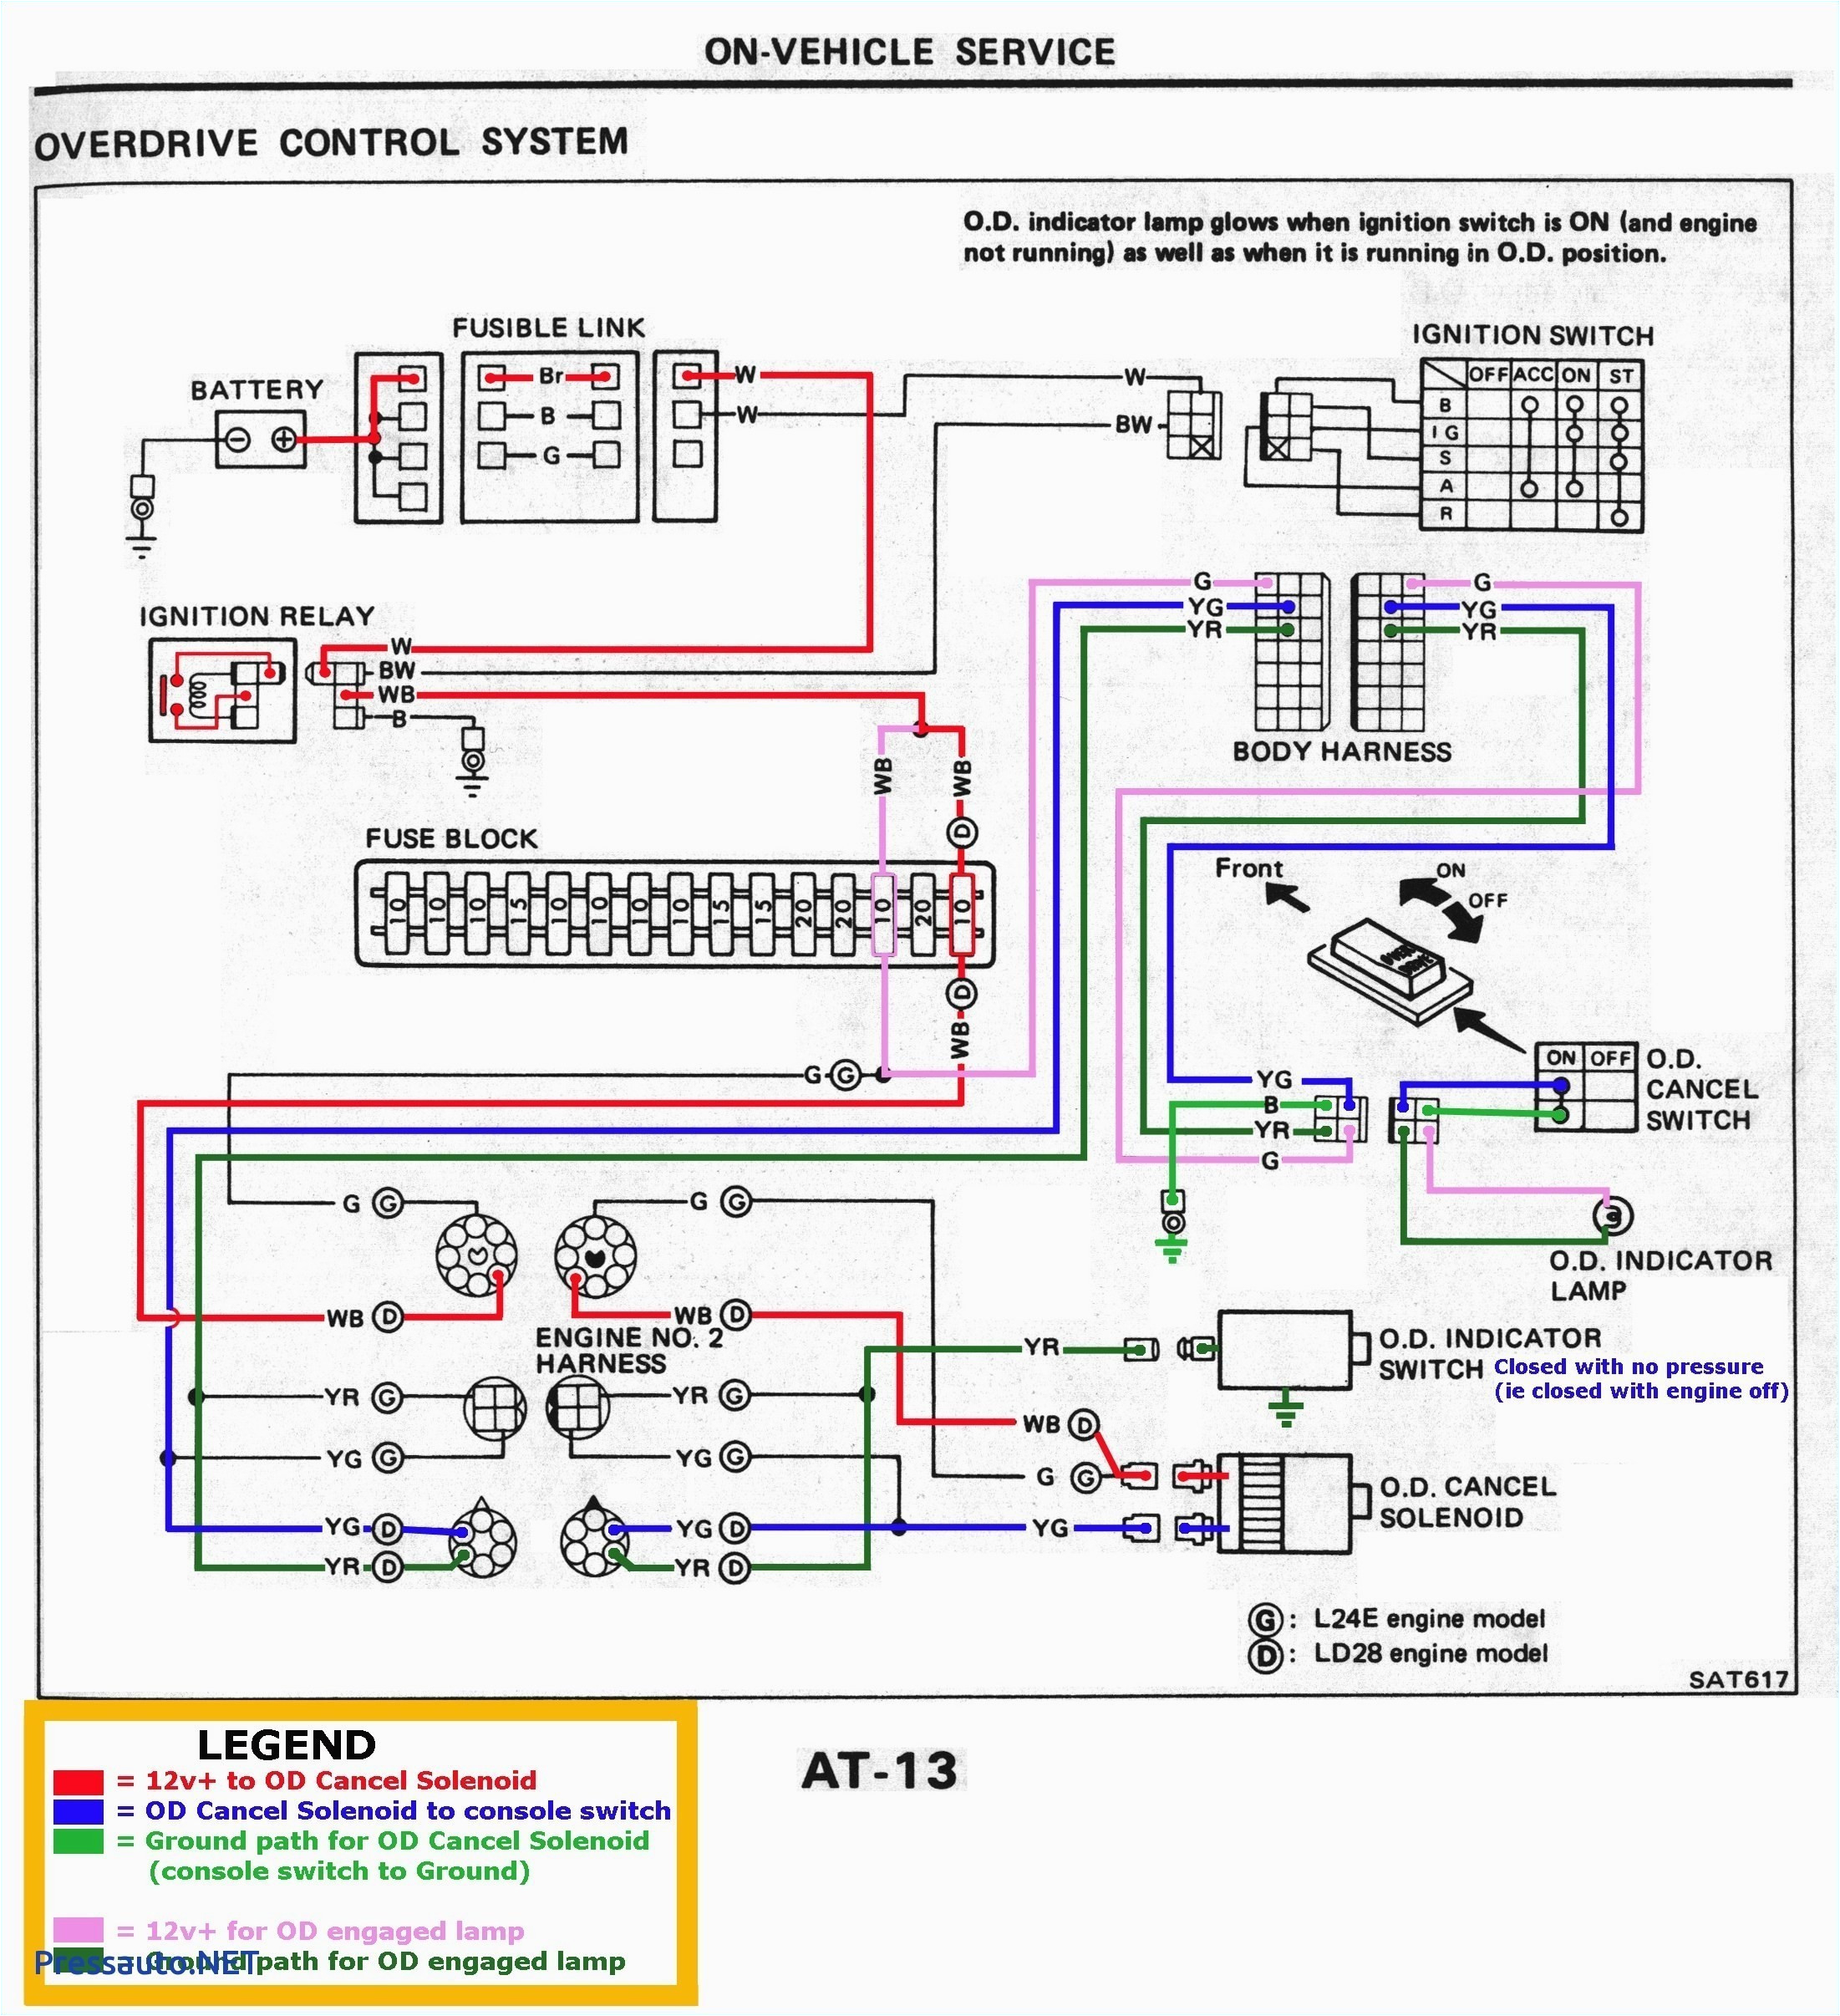 hubbell pressure switch wiring diagram best of automotive thermal wiring relay diagram trusted schematic diagrams e280a2 jpg